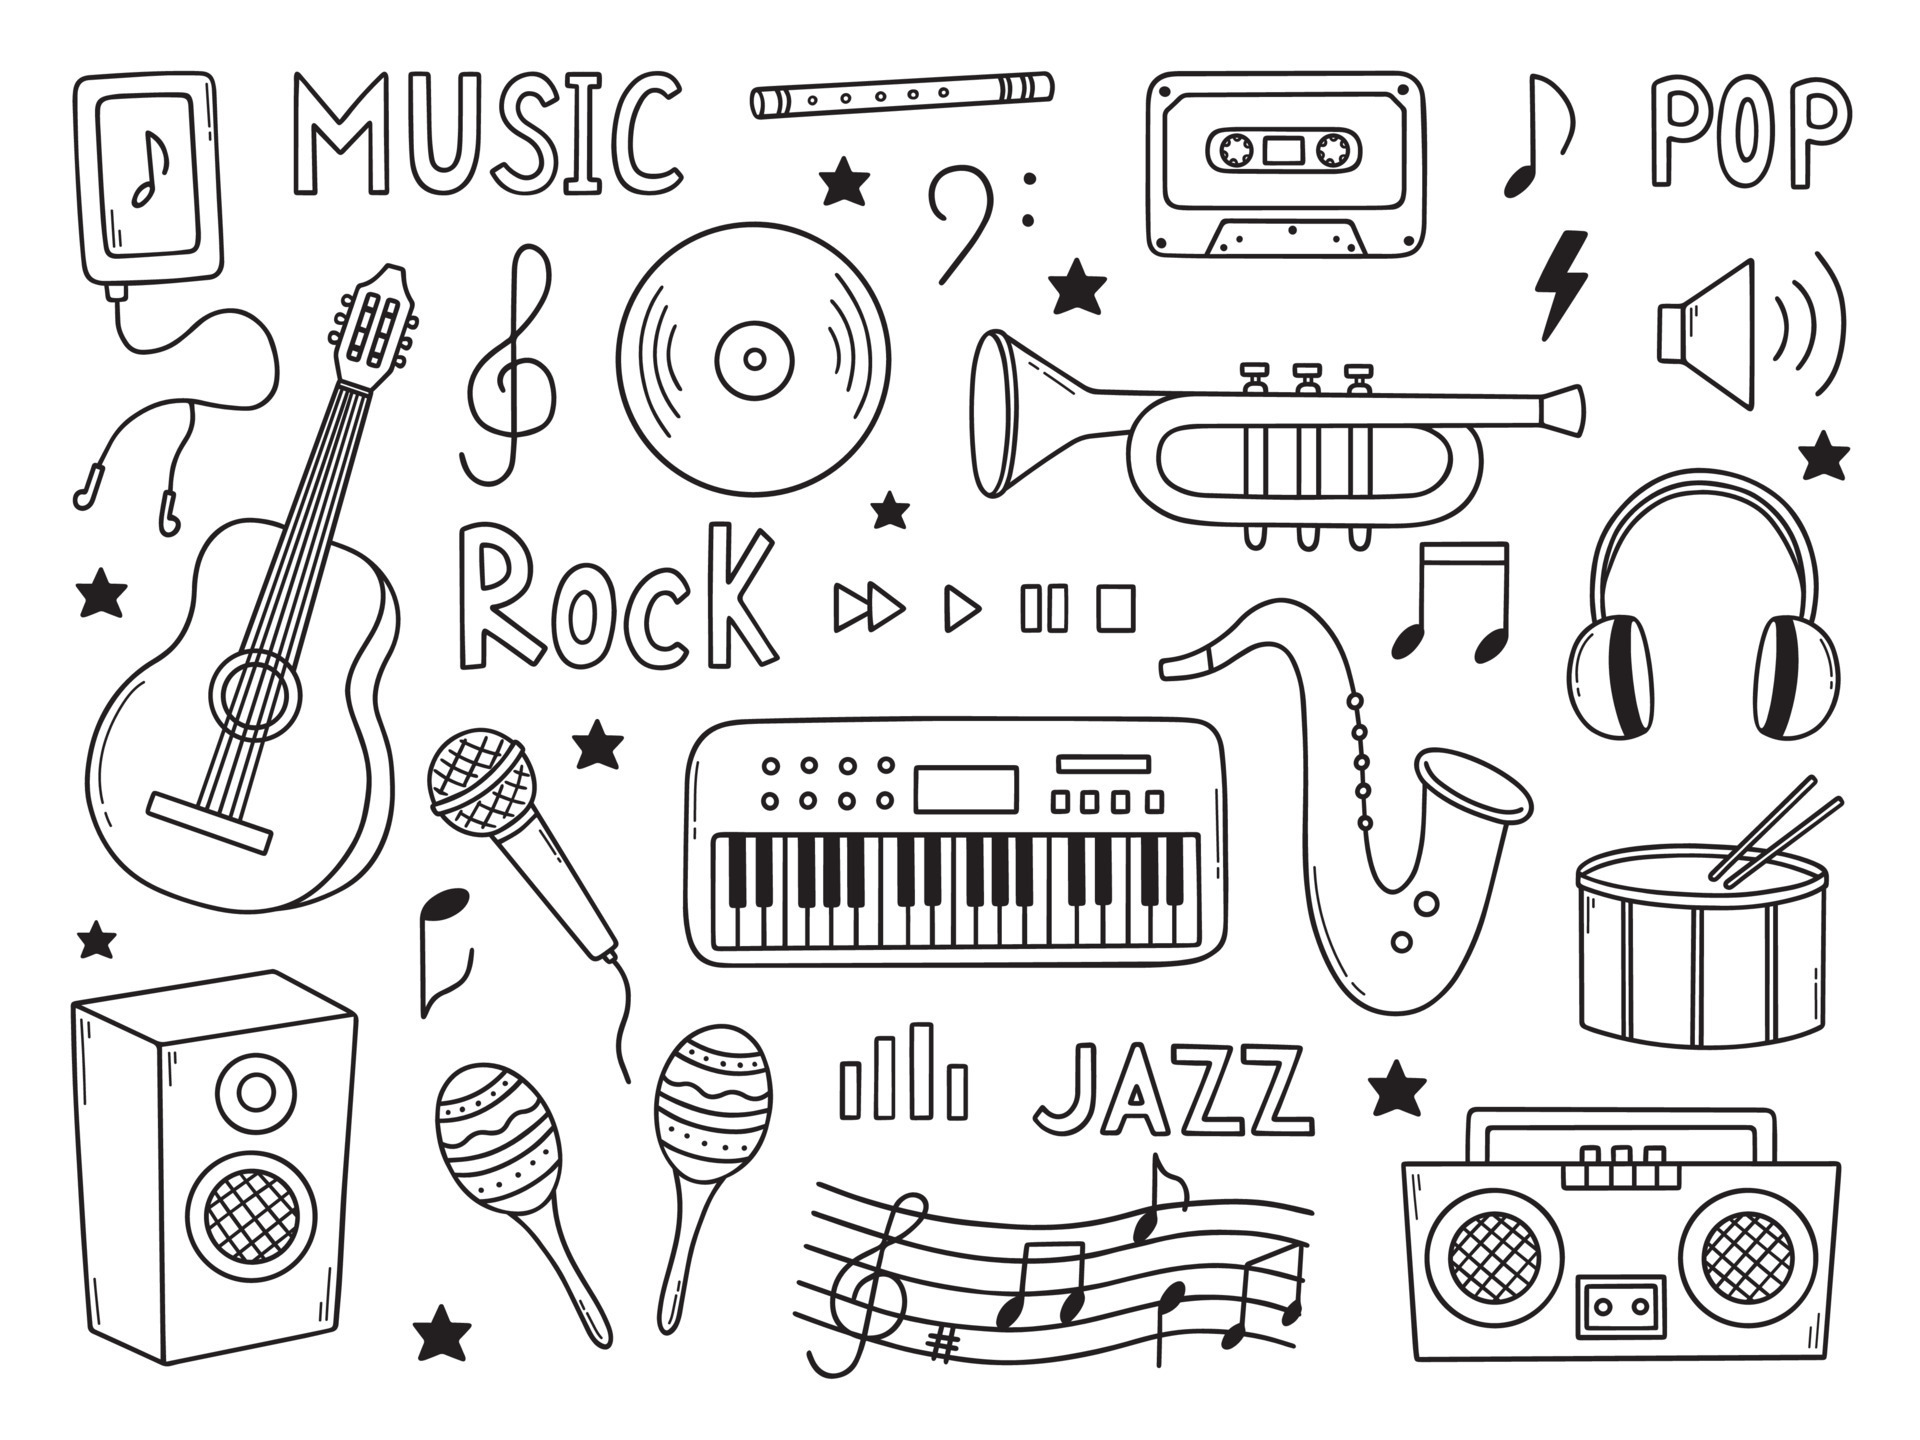 Sketch of musical instruments Royalty Free Vector Image